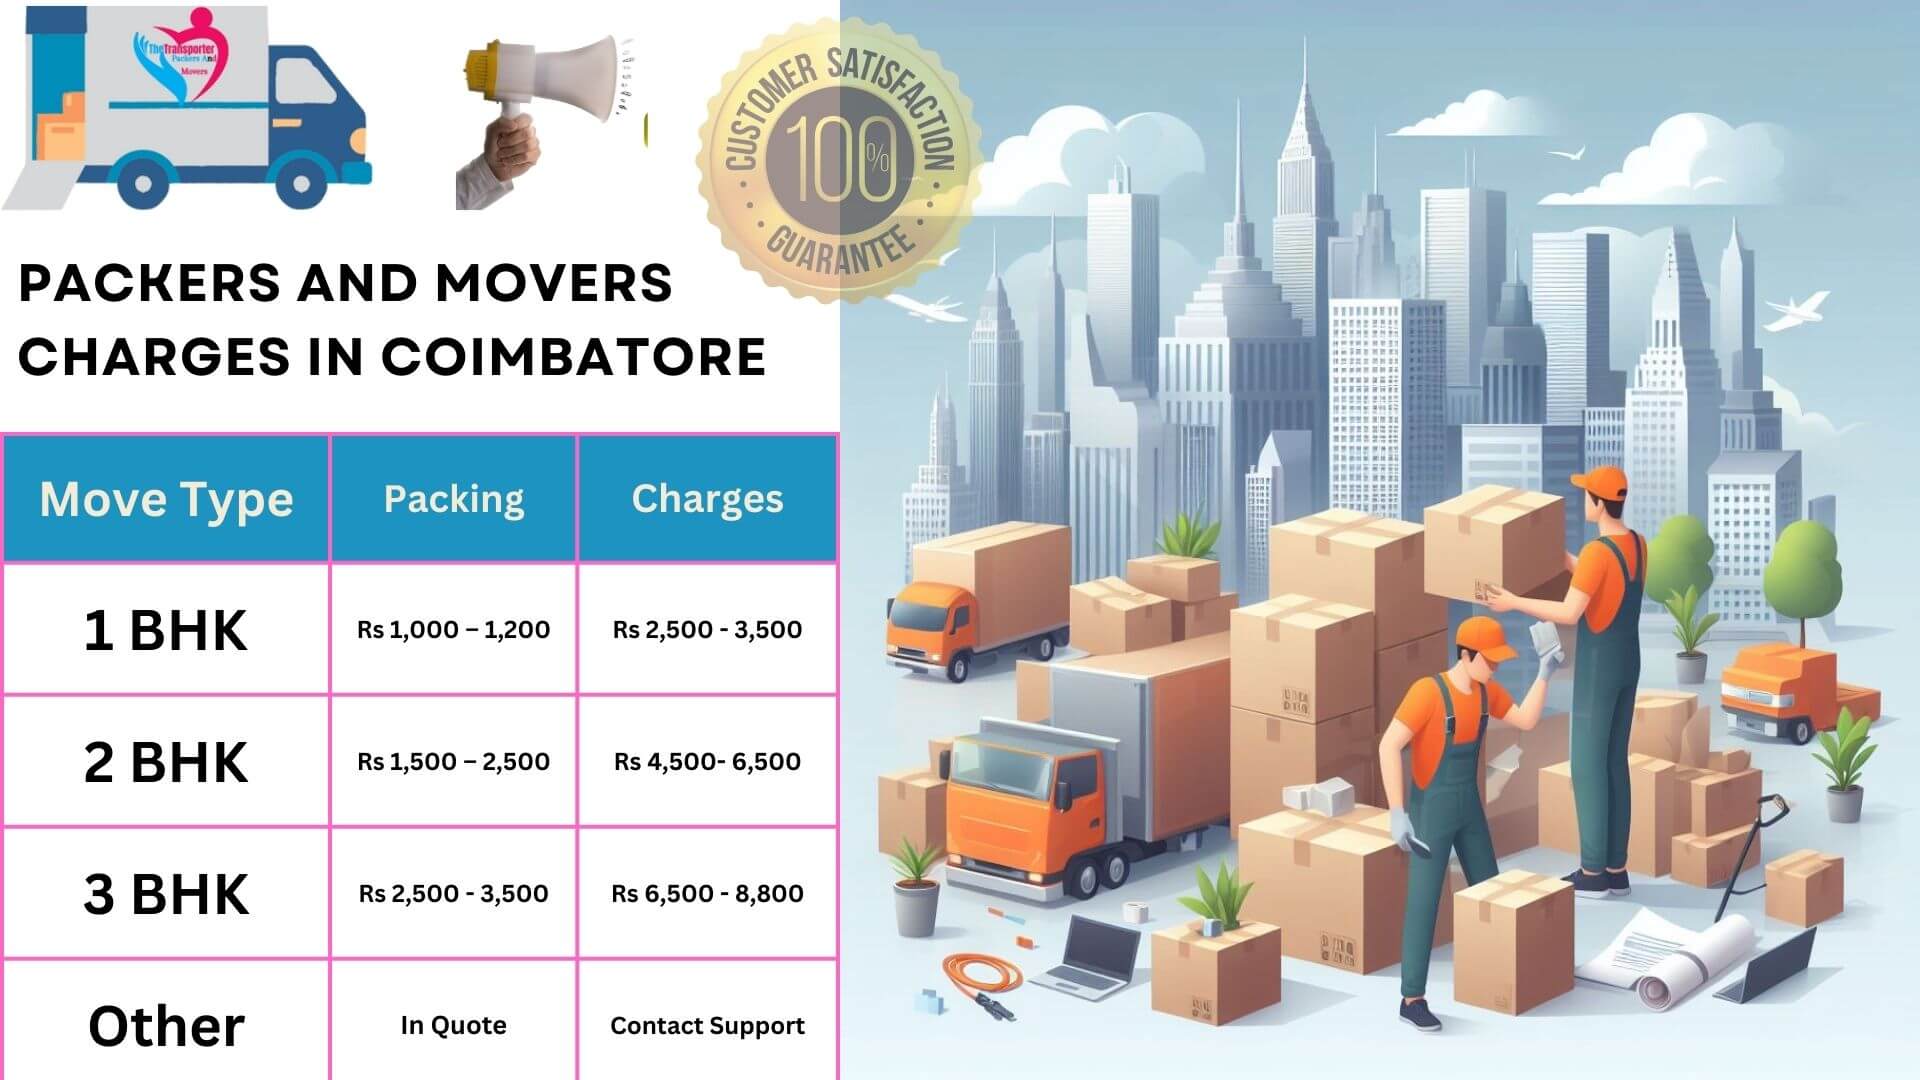 TheTransporter Packers and movers Charges list in Coimbatore 